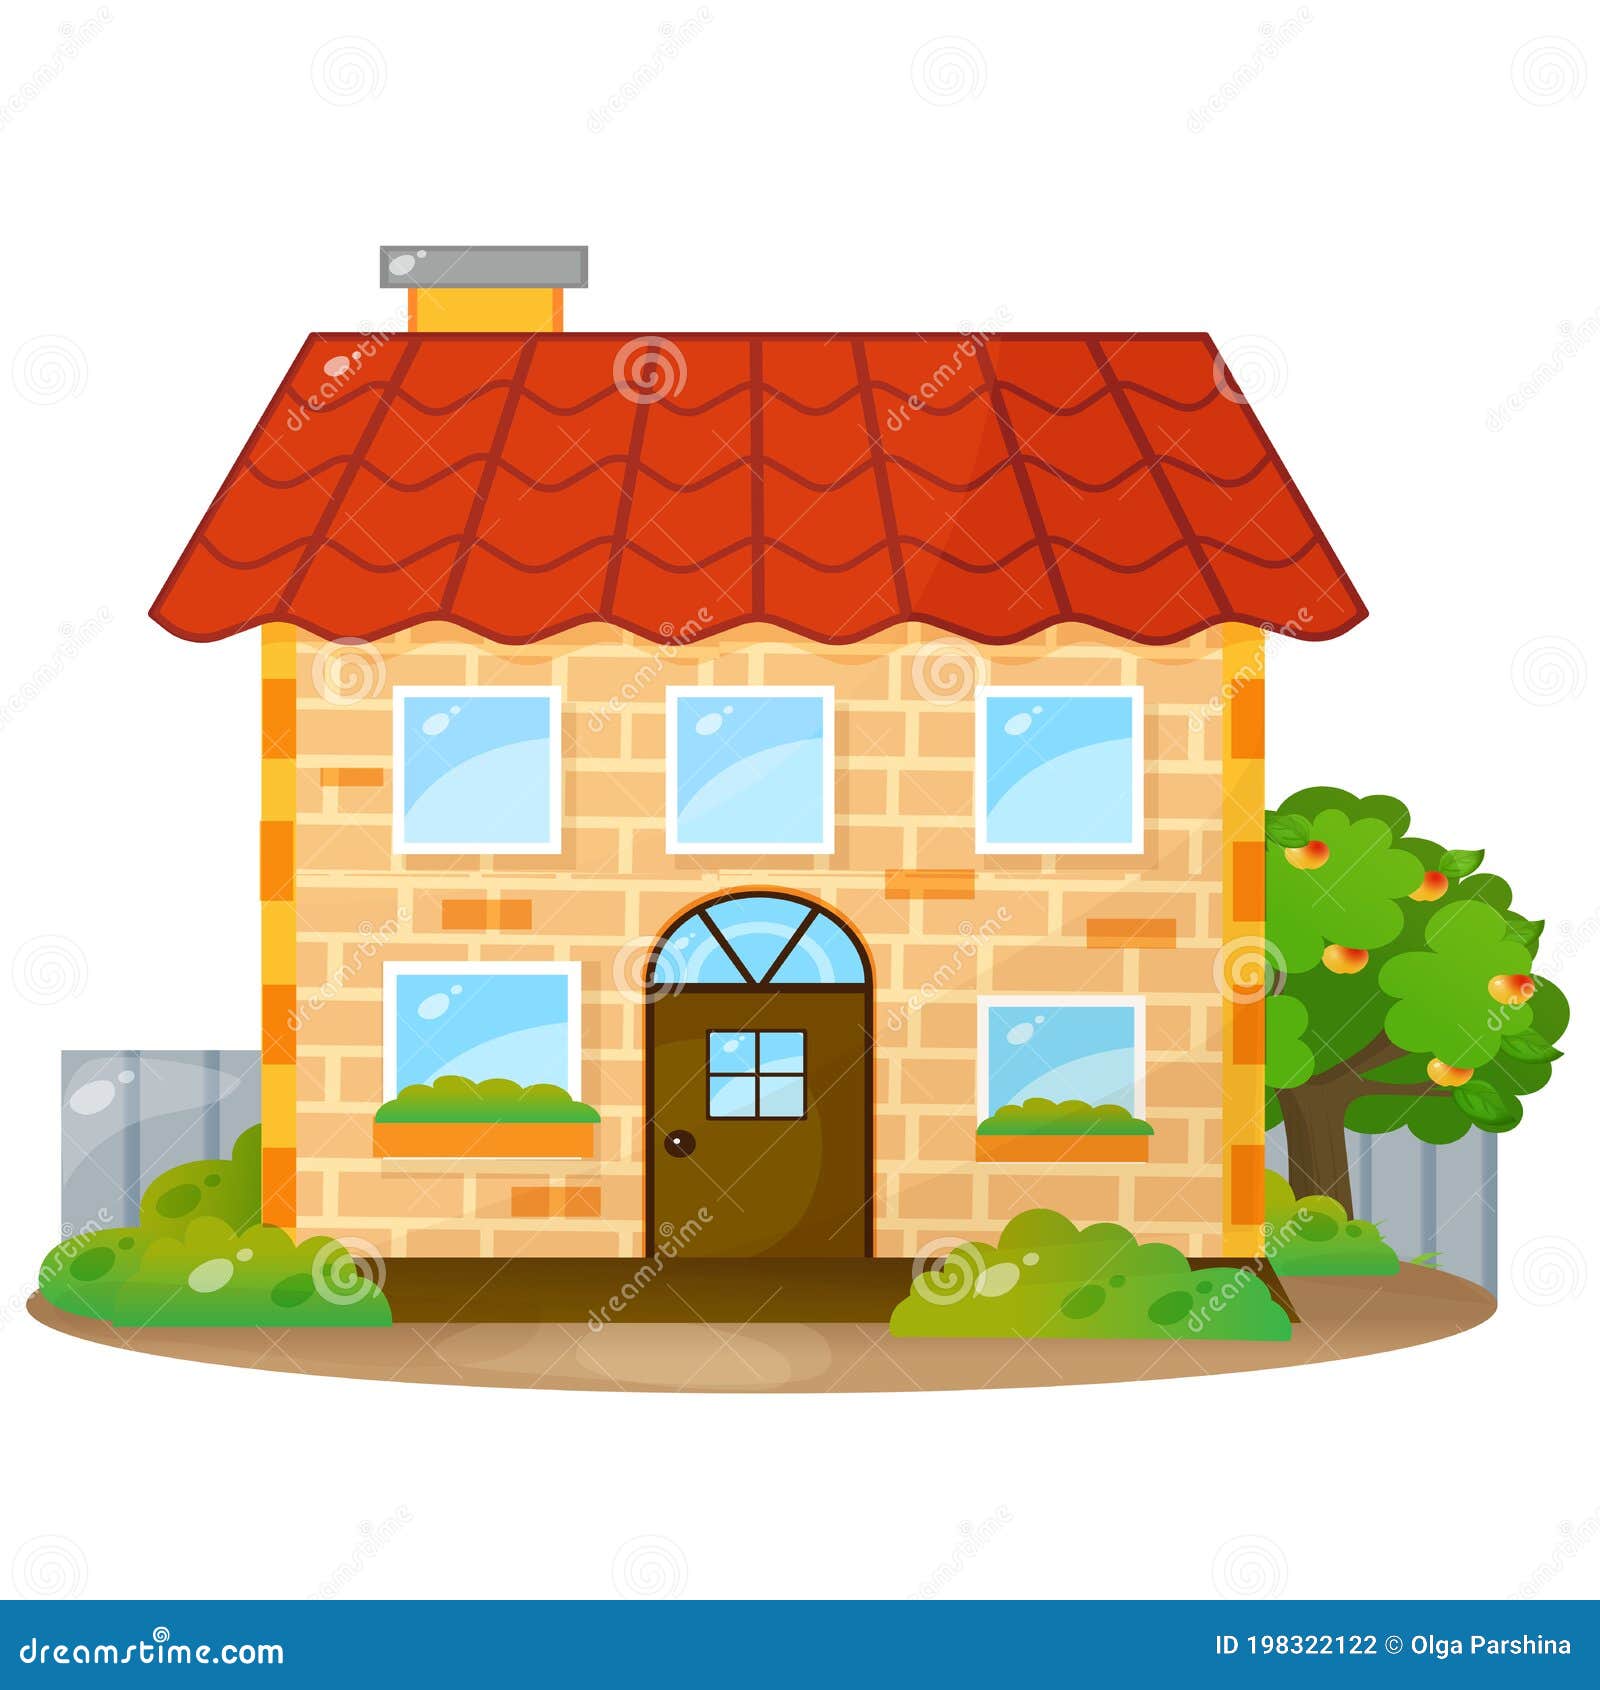 Color Image of Cartoon Brick House with Red Roof on White Background.  Vector Illustration for Kids Stock Vector - Illustration of color, home:  198322122